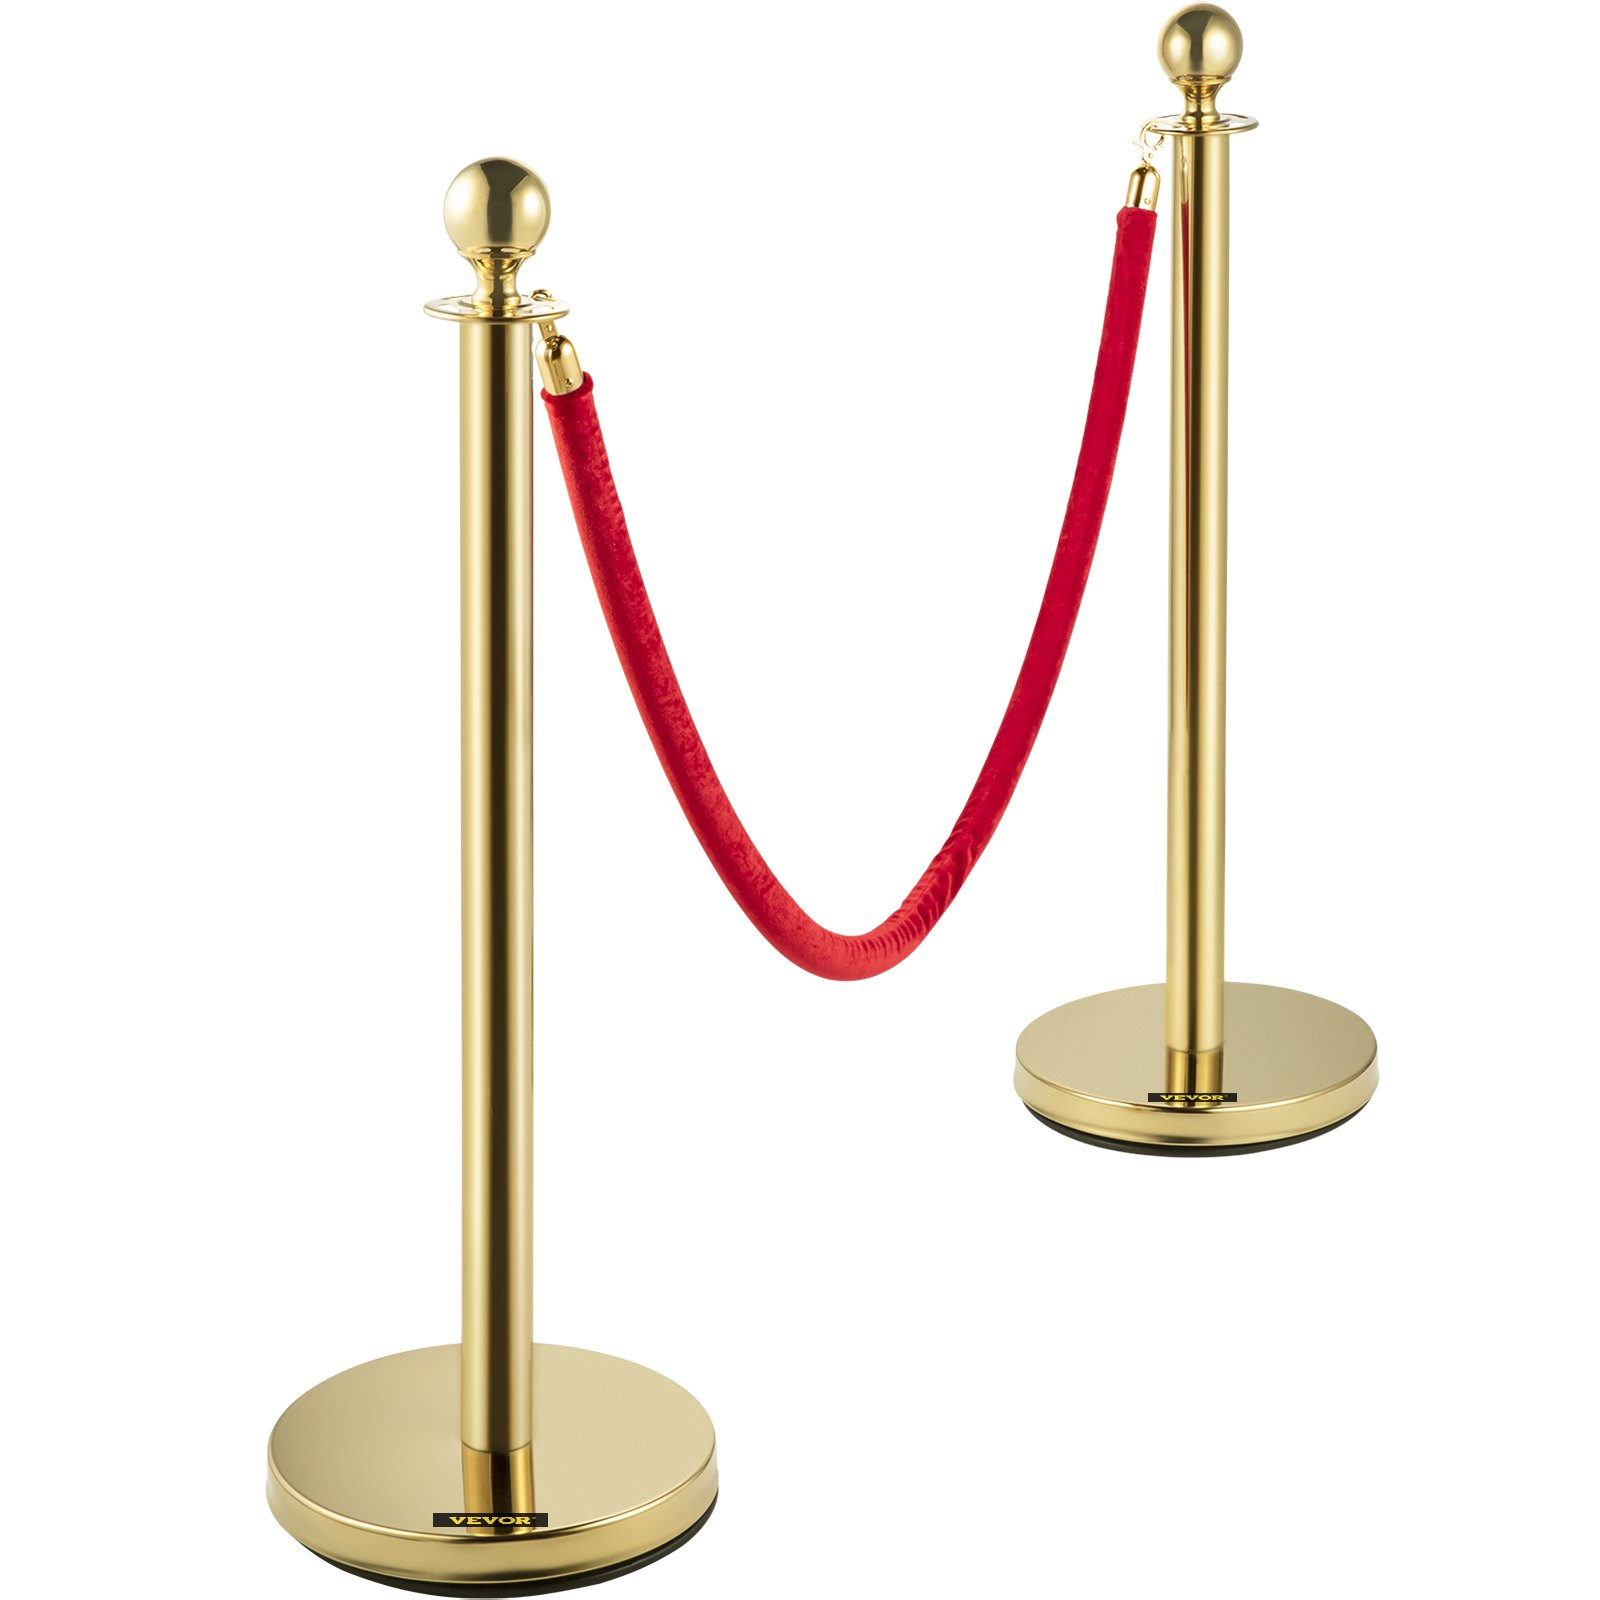 VEVOR Velvet Ropes and Posts, 5 ft/1.5 m Red Rope, Stainless Steel Gold Stanchion with Ball Top, Red Crowd Control Barrier Used for Theaters, Party, Wedding, Exhibition, Ticket Offices 4 packSets, Goodies N Stuff